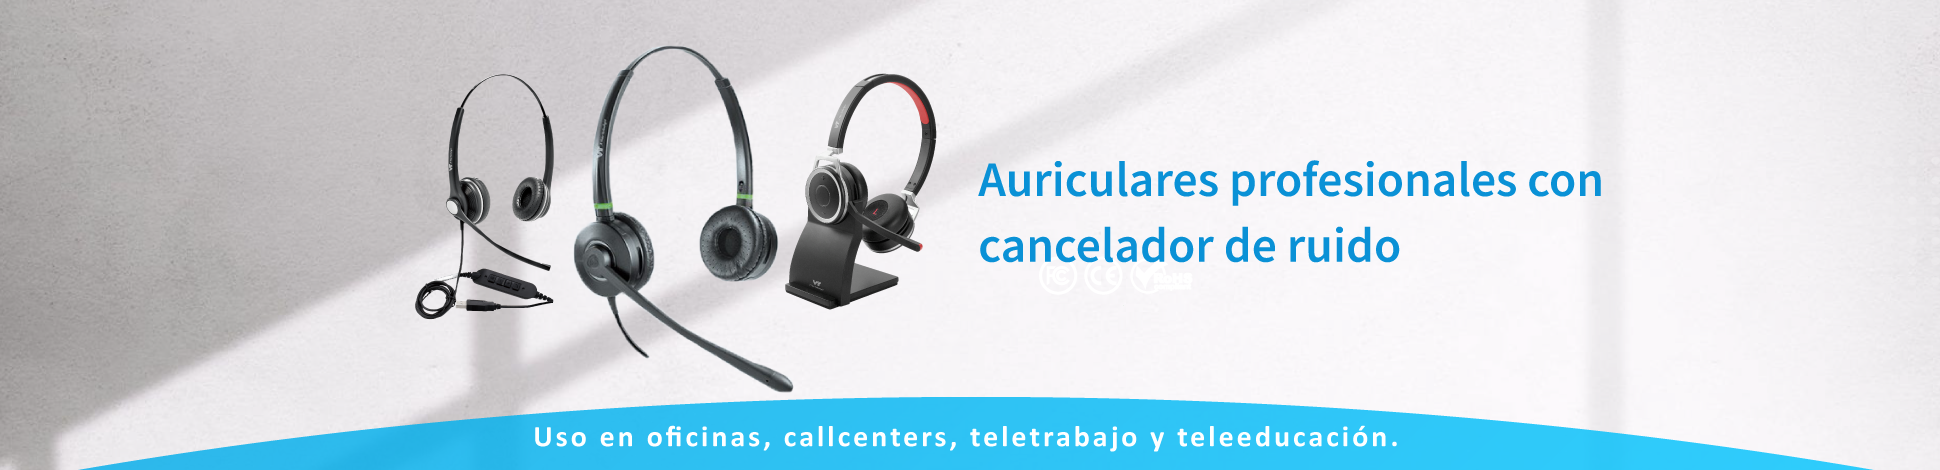 vt1-auriculares-proifesonales.png